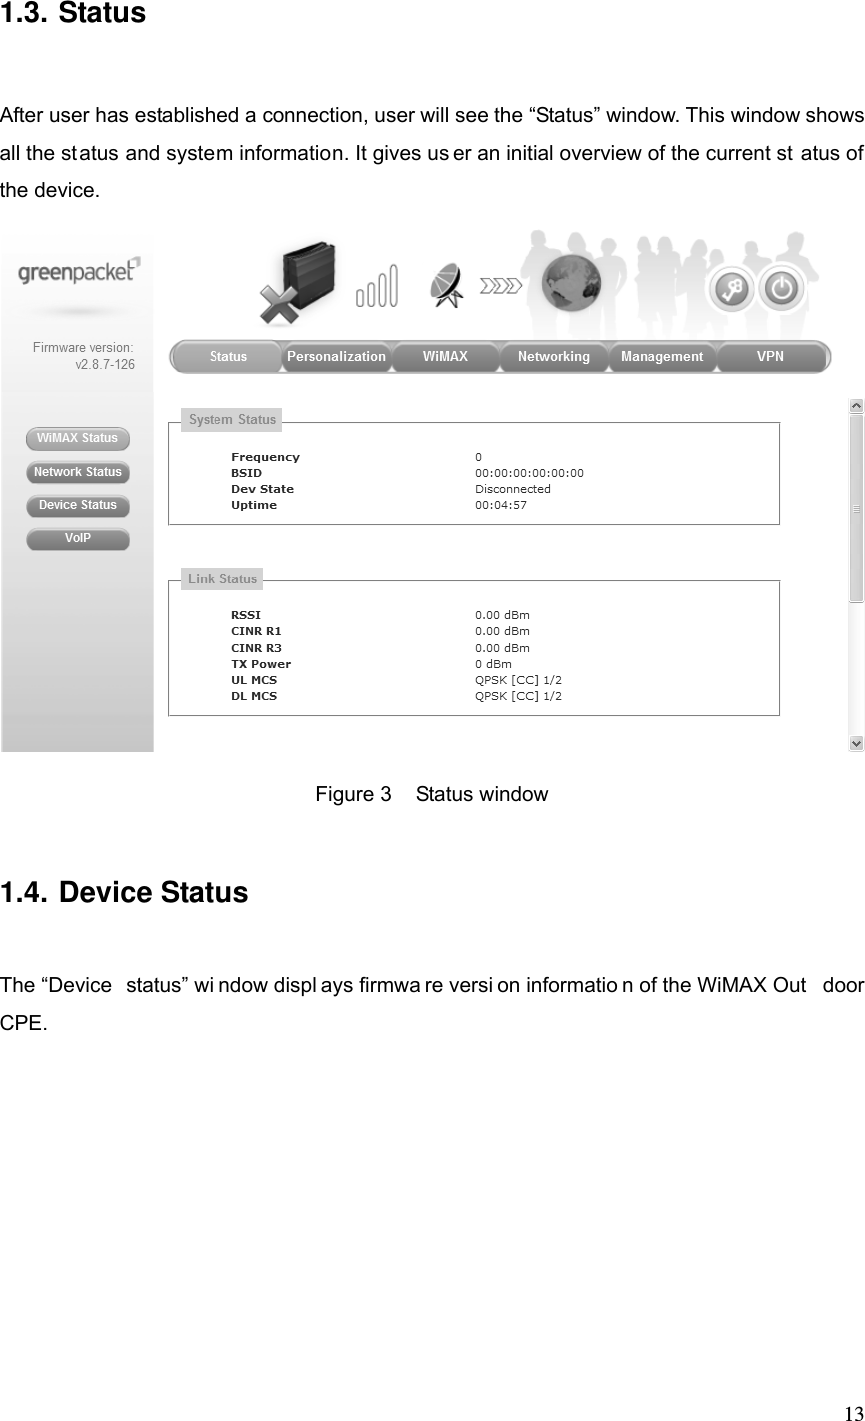  131.3. Status After user has established a connection, user will see the “Status” window. This window shows all the status and system information. It gives us er an initial overview of the current st atus of the device.    Figure 3  Status window 1.4. Device Status The “Device  status” wi ndow displ ays firmwa re versi on informatio n of the WiMAX Out door CPE.  